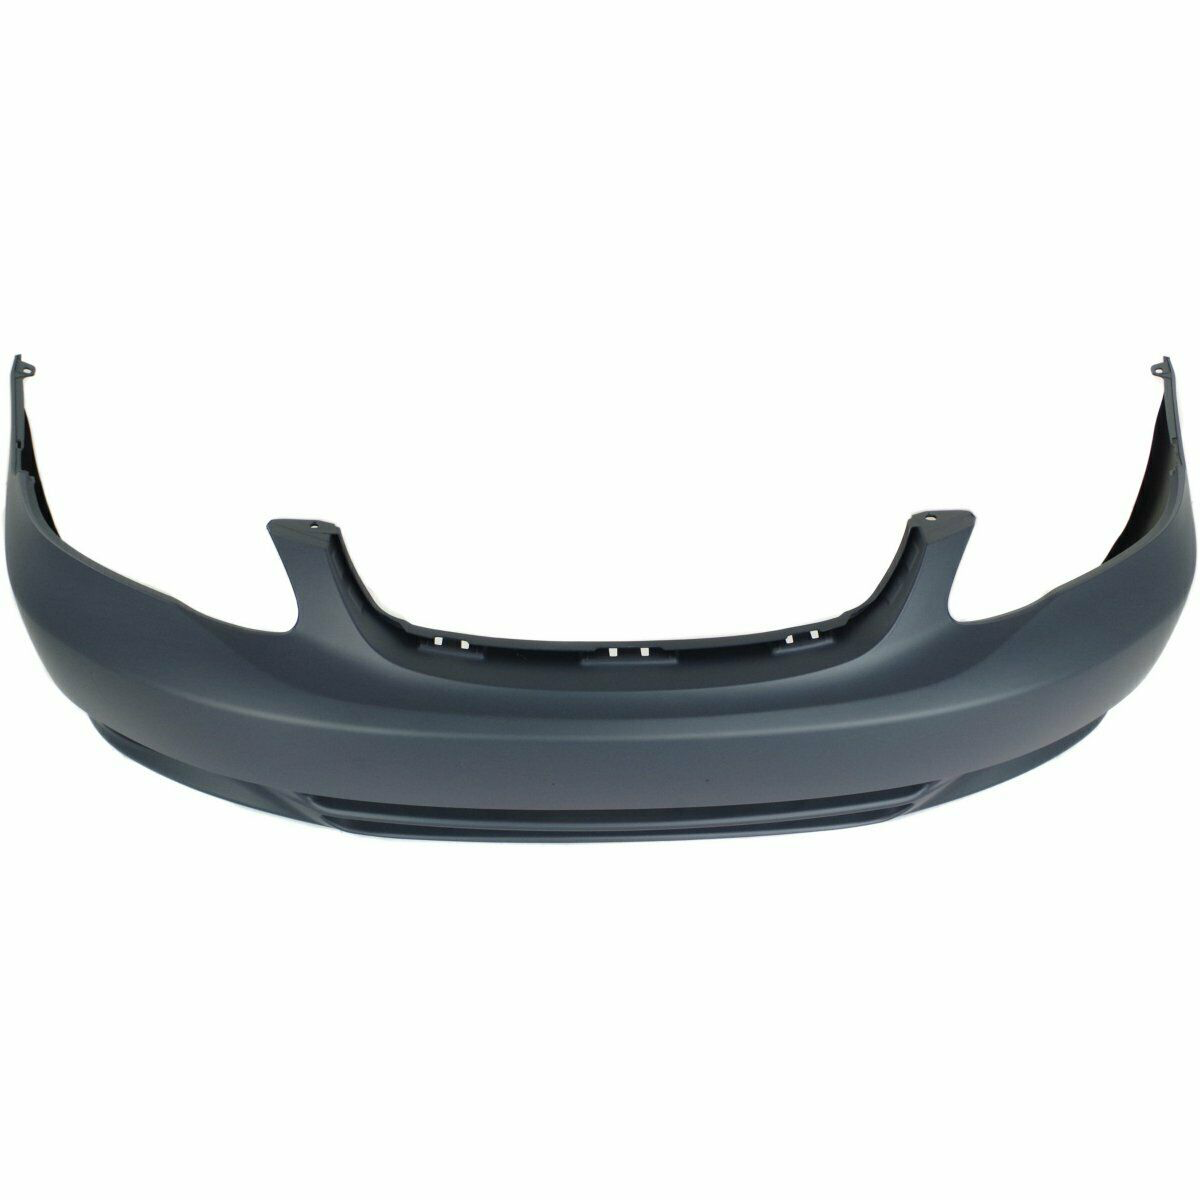 2003-2004 Toyota Corolla Front Bumper Painted to Match